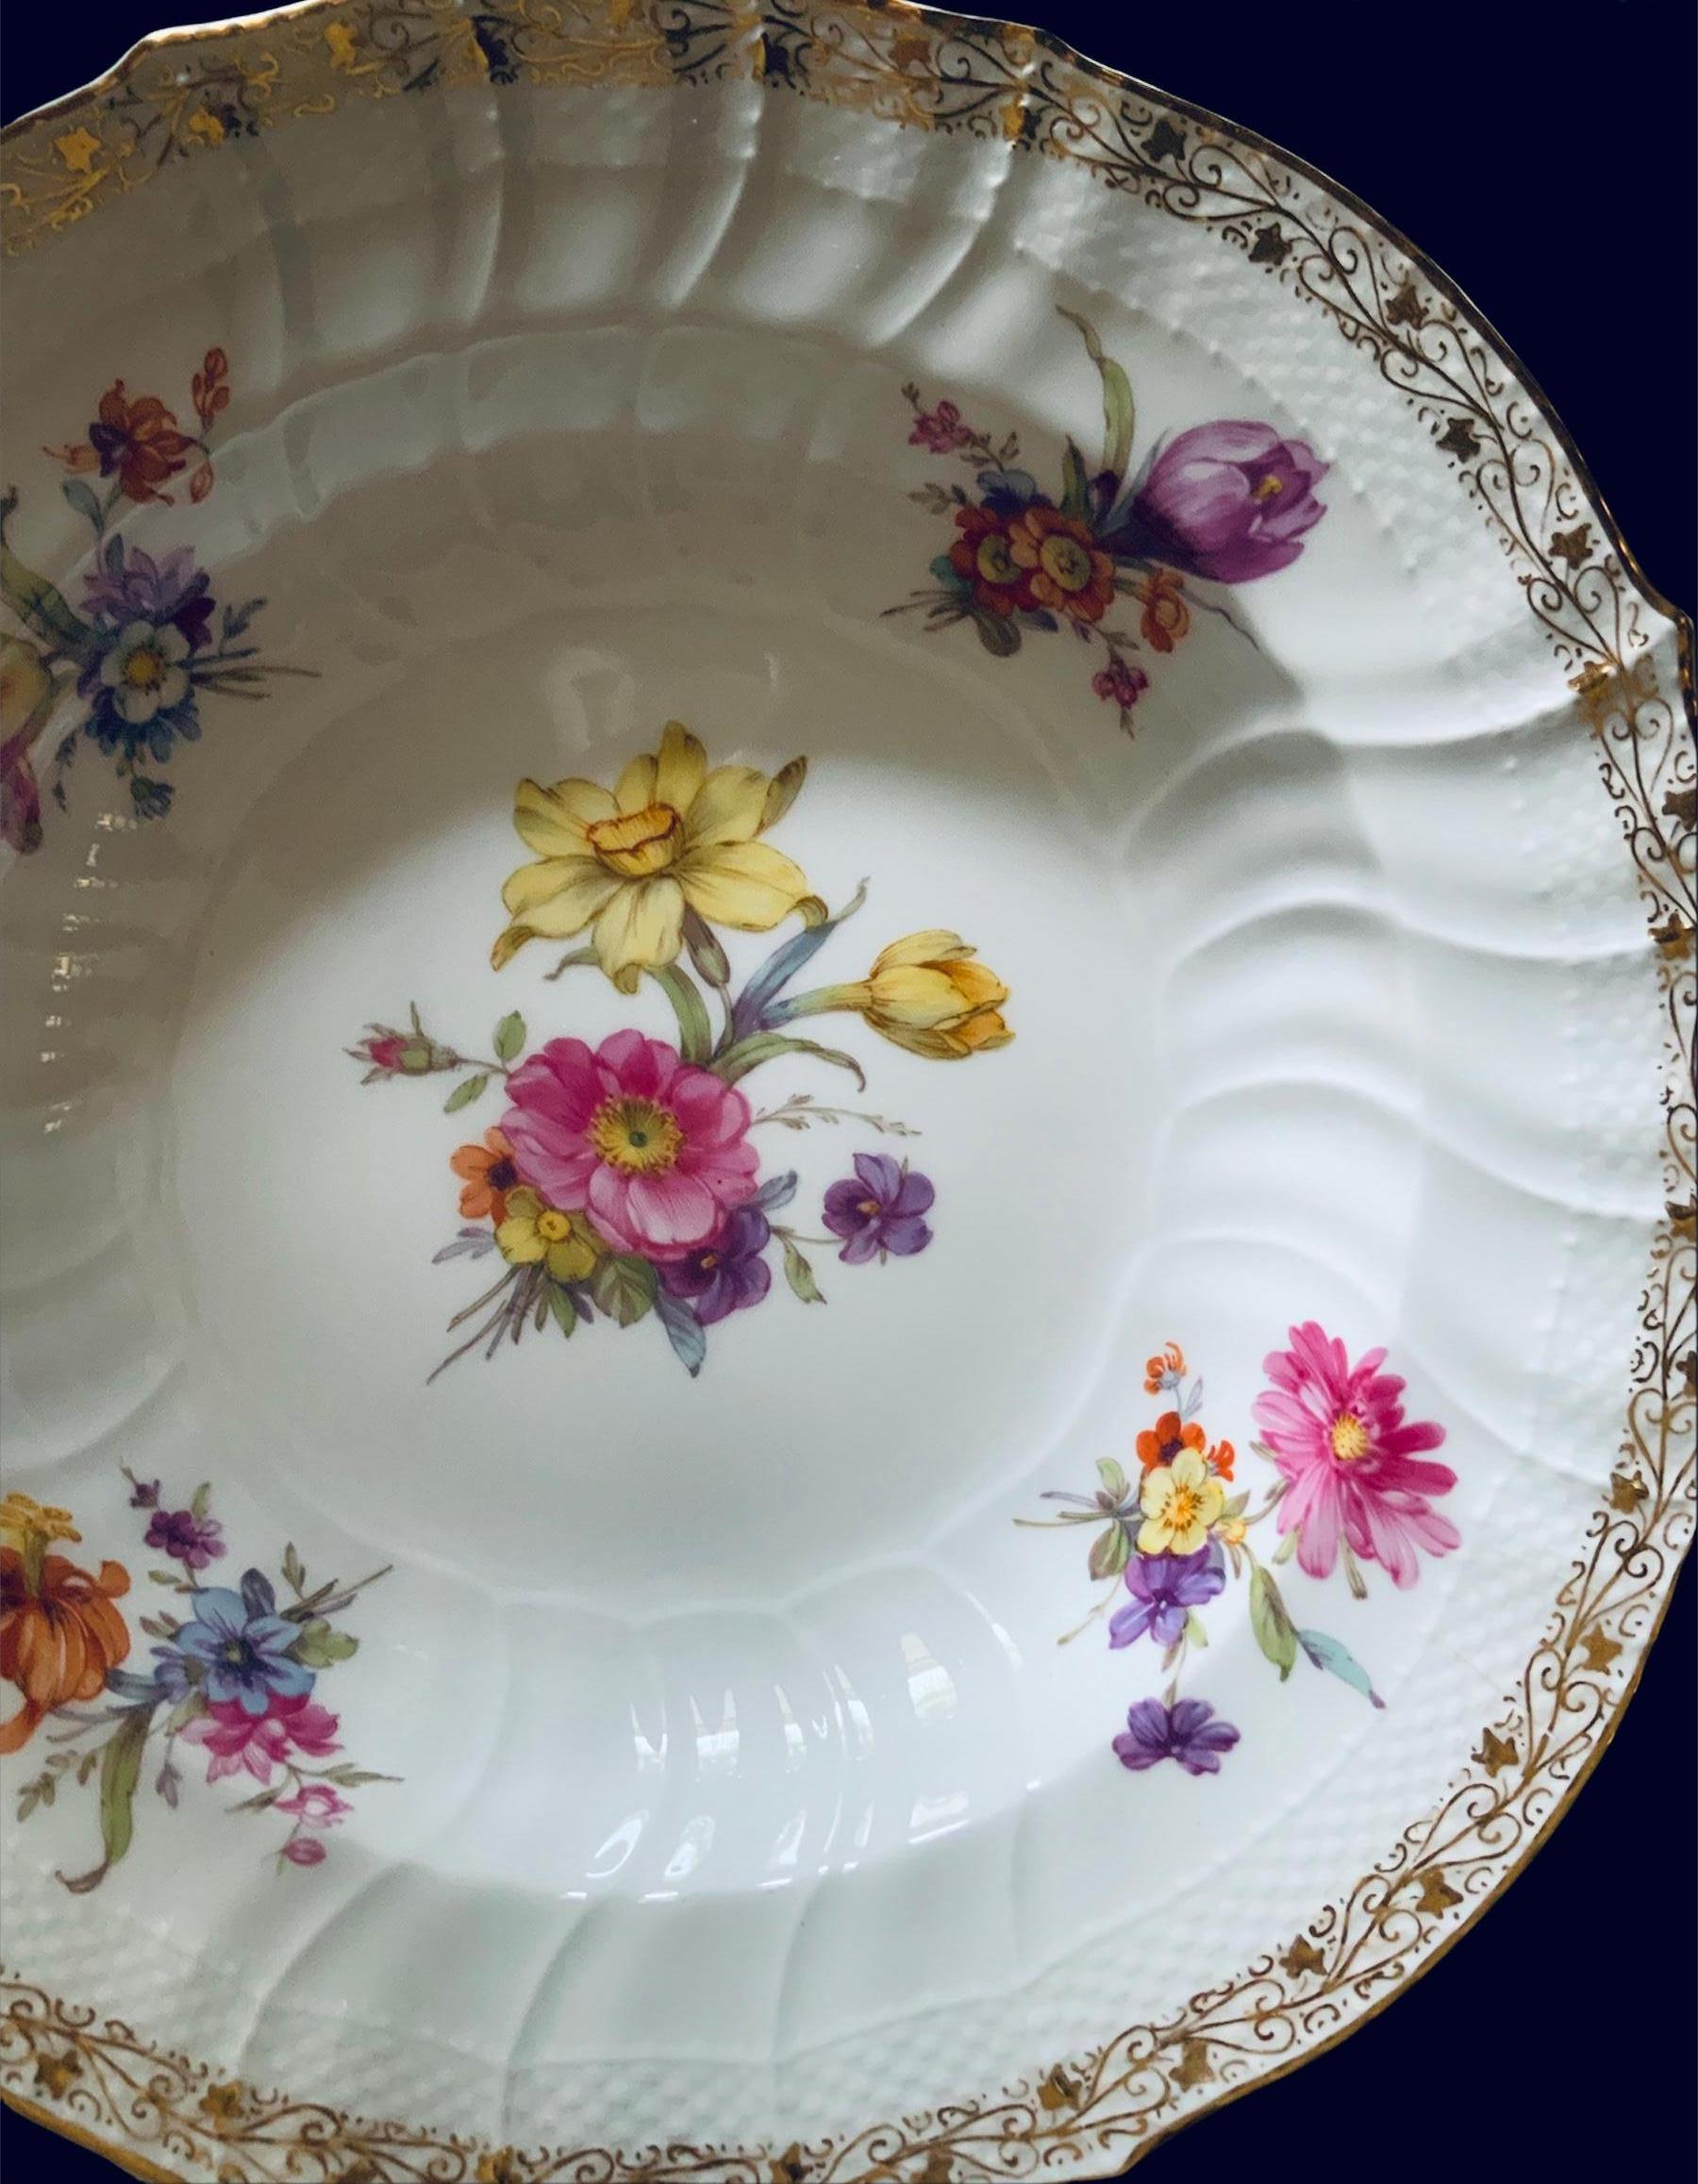 This is a KPM Porcelain set of two large bowl plates. They are decorated with a large bouquet of flowers in the center and four small bouquets of flowers around the border. A delicate gilt vine of hearts and ivy leaves embellish the border in